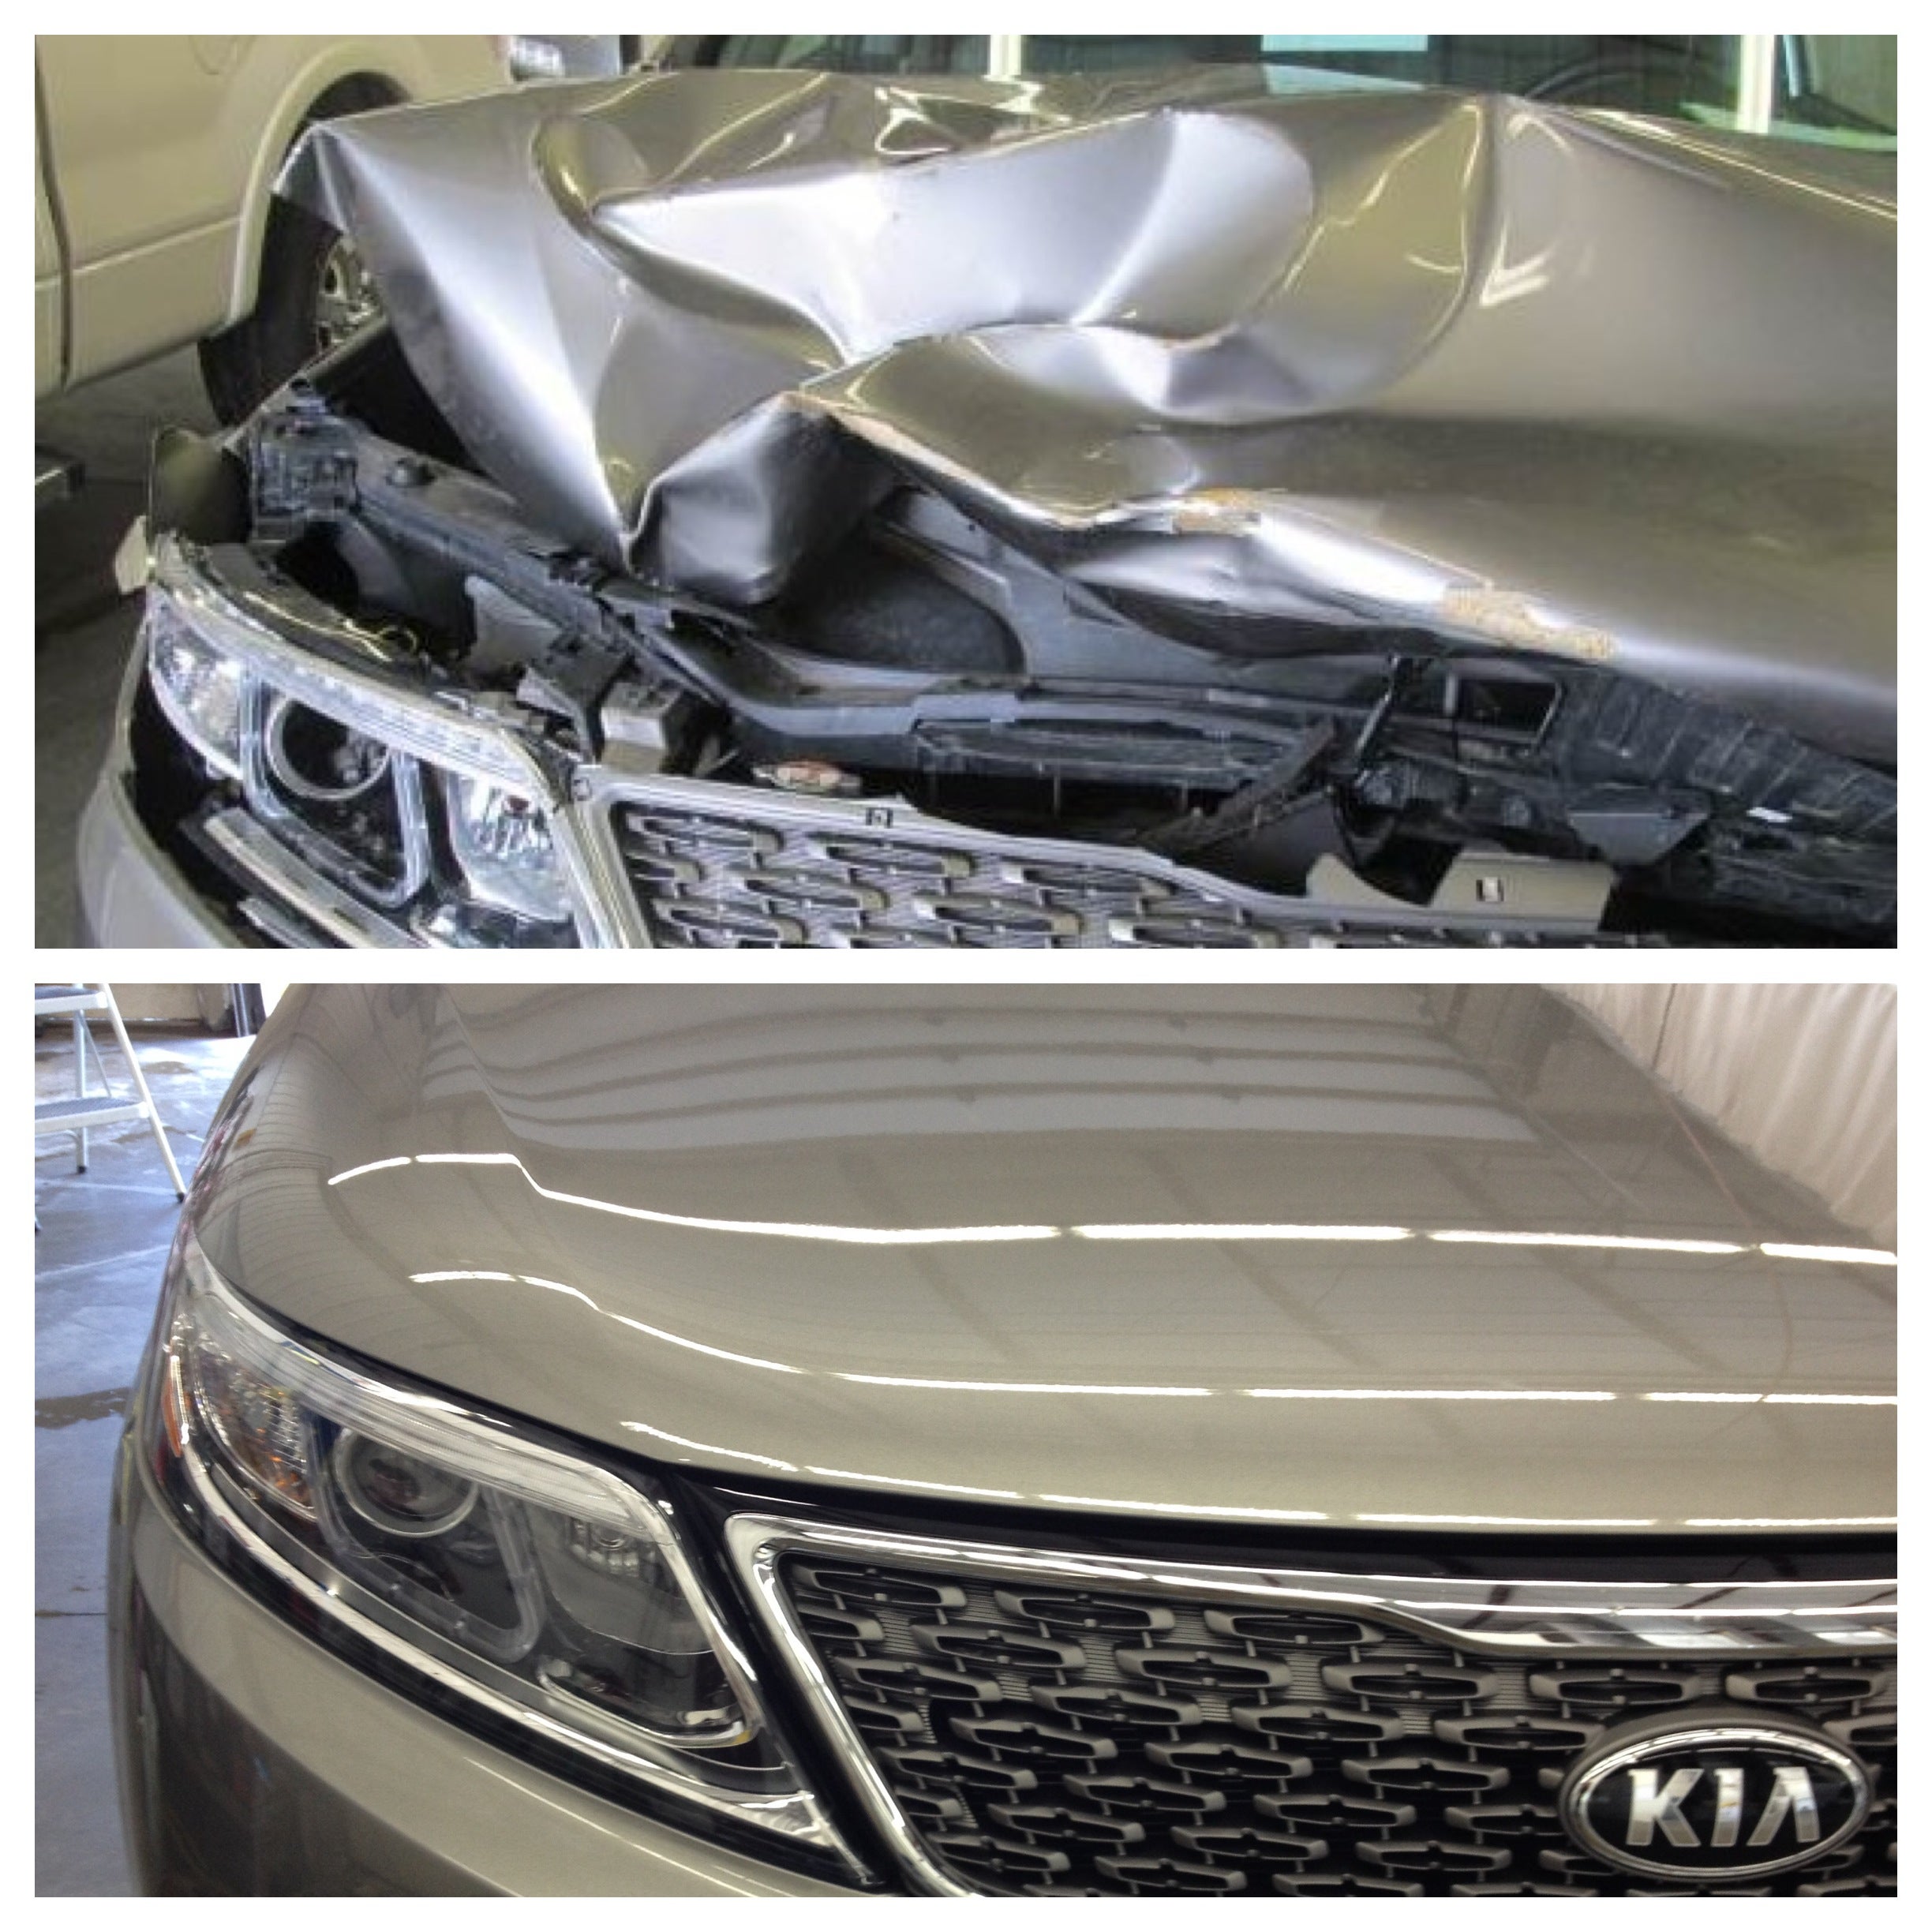 Before and After photos | Rochester Motor Cars in Rochester MN